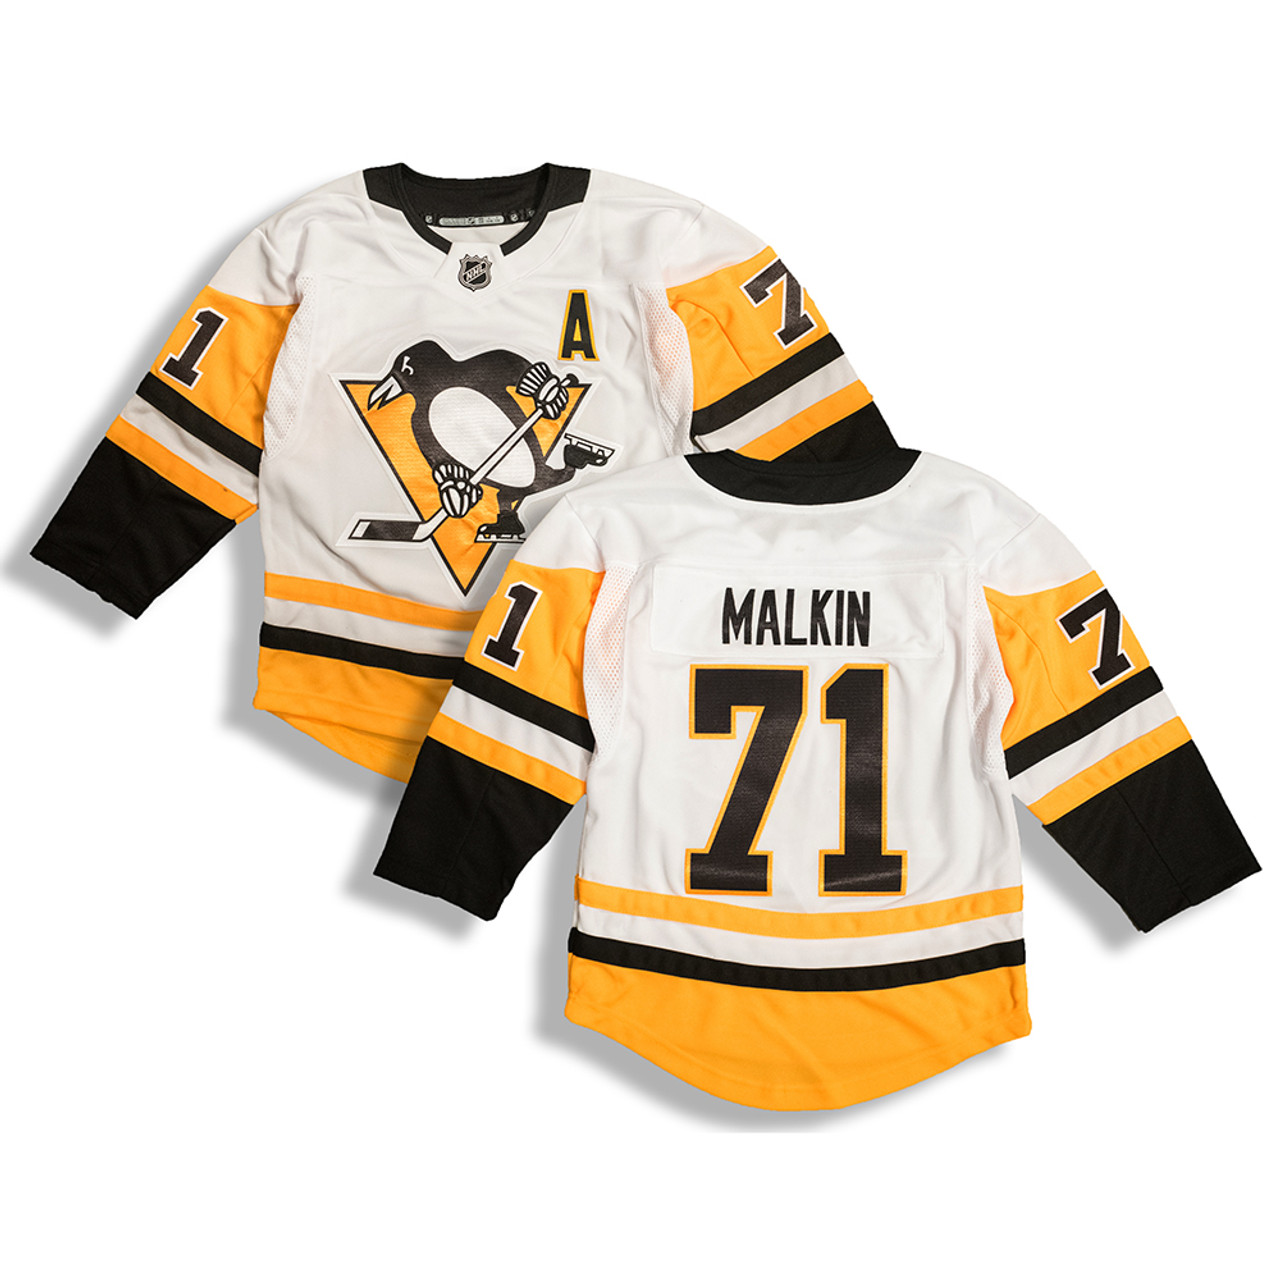 Youth Pittsburgh Penguins jersey